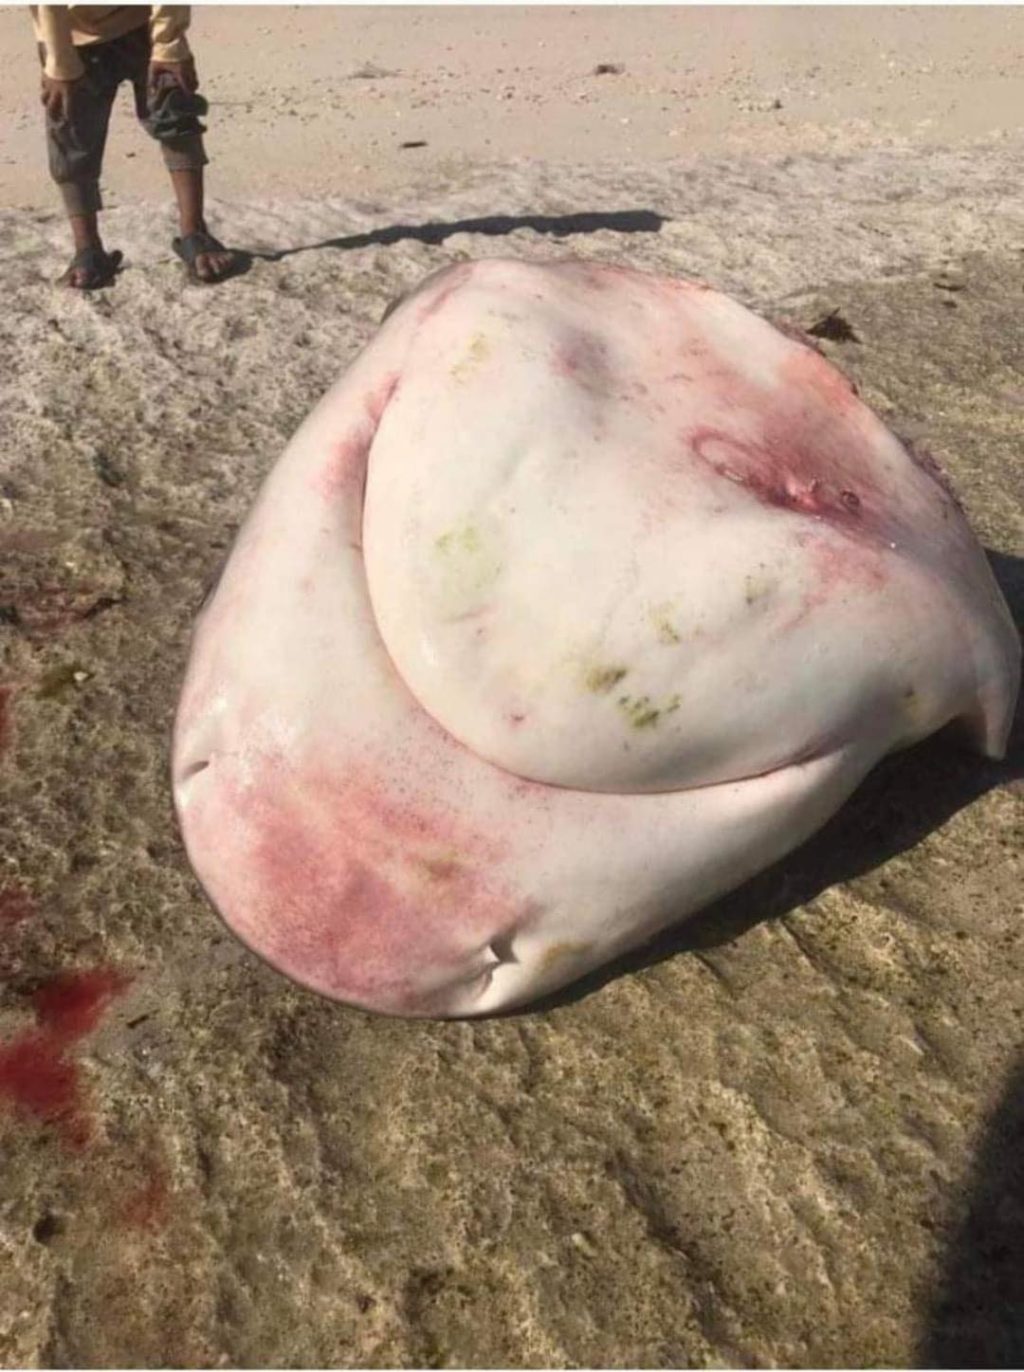 DAANBANTAYAN ORDERS PROBE ON MUTILATED SHARK HEAD FOUND IN MALAPASCUA. A mutilated shark head found in the shores of Malapascua Island has prompted Daanbantayan LGU to order an investigation on how this happened and to arrest the culprit. | Photo courtesy of Daanbantayan LGU